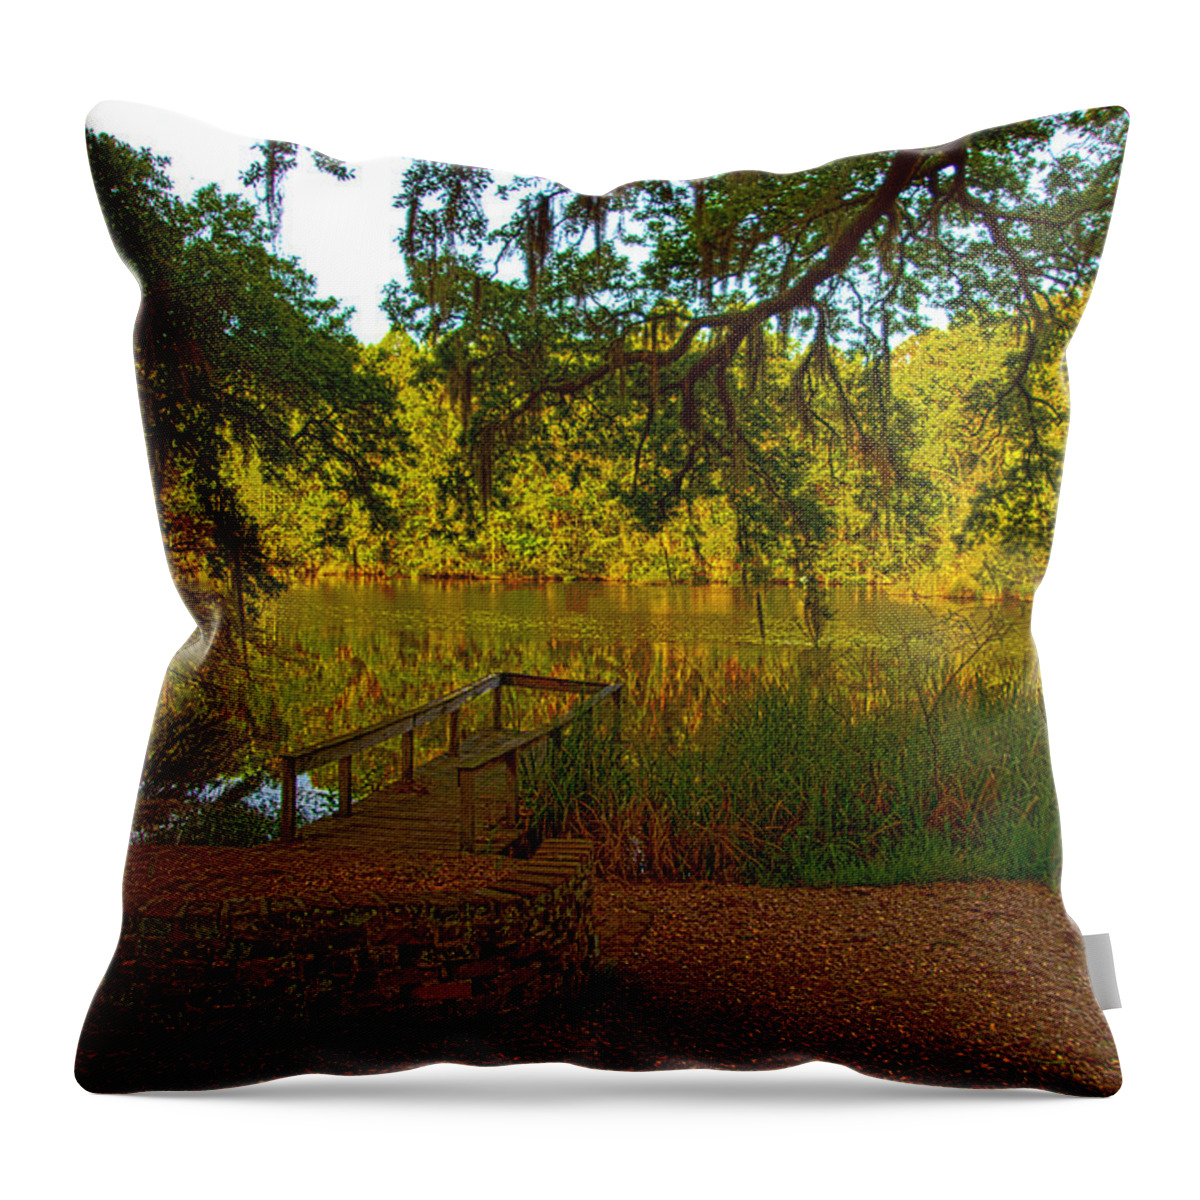 Pond Throw Pillow featuring the photograph Hobcaw Barony Pond by Bill Barber